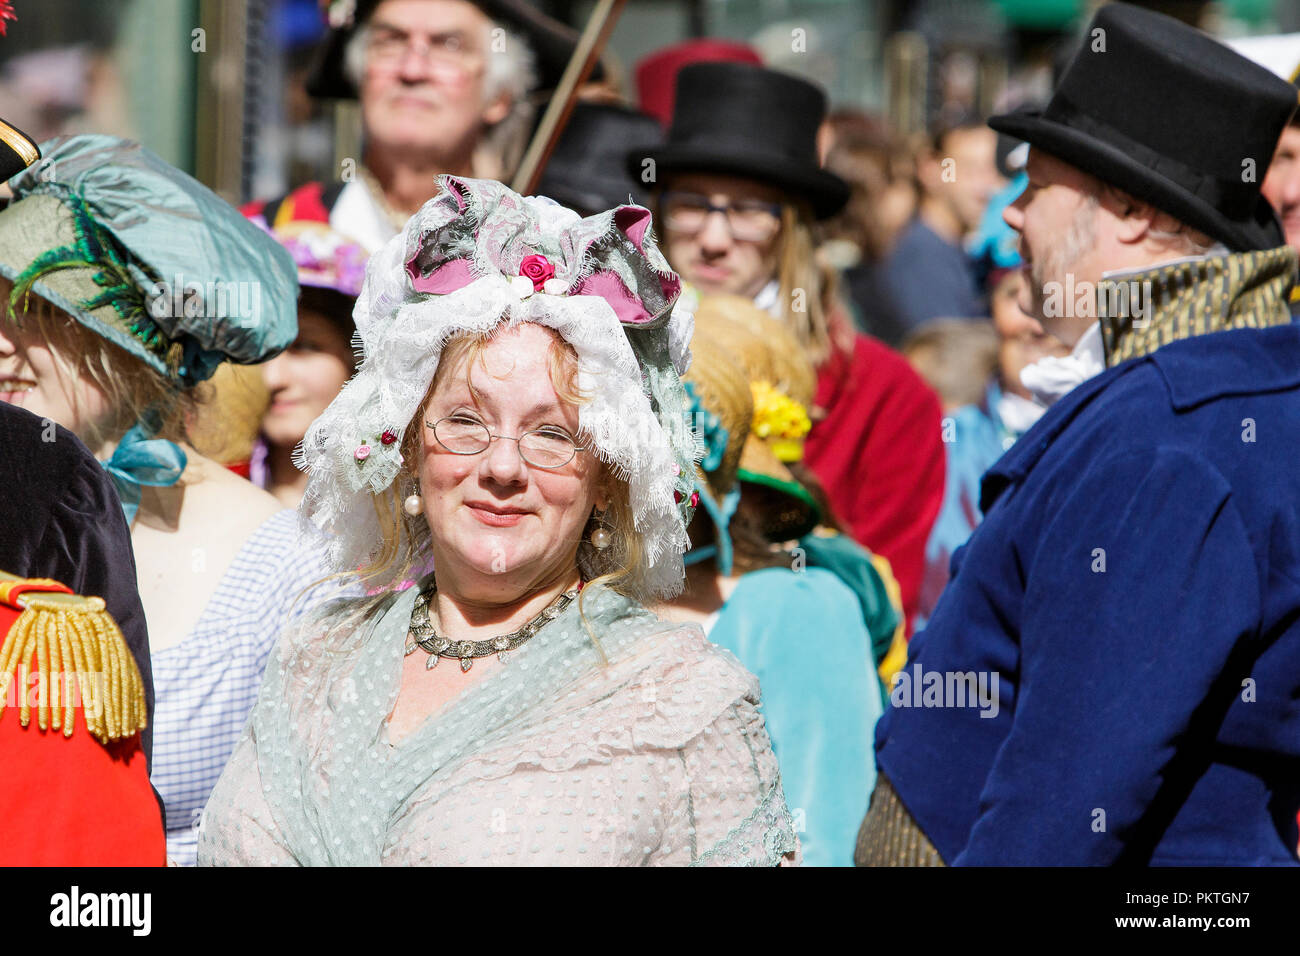 Bath, UK. 15th Sep, 2018. Jane Austen fans are pictured taking part in the world famous Grand Regency Costumed Promenade. The Promenade, part of the Jane Austen Festival is a procession through the streets of Bath and the participants who come from all over the world dress in 18th Century costume. Credit:  Lynchpics/Alamy Live News Stock Photo